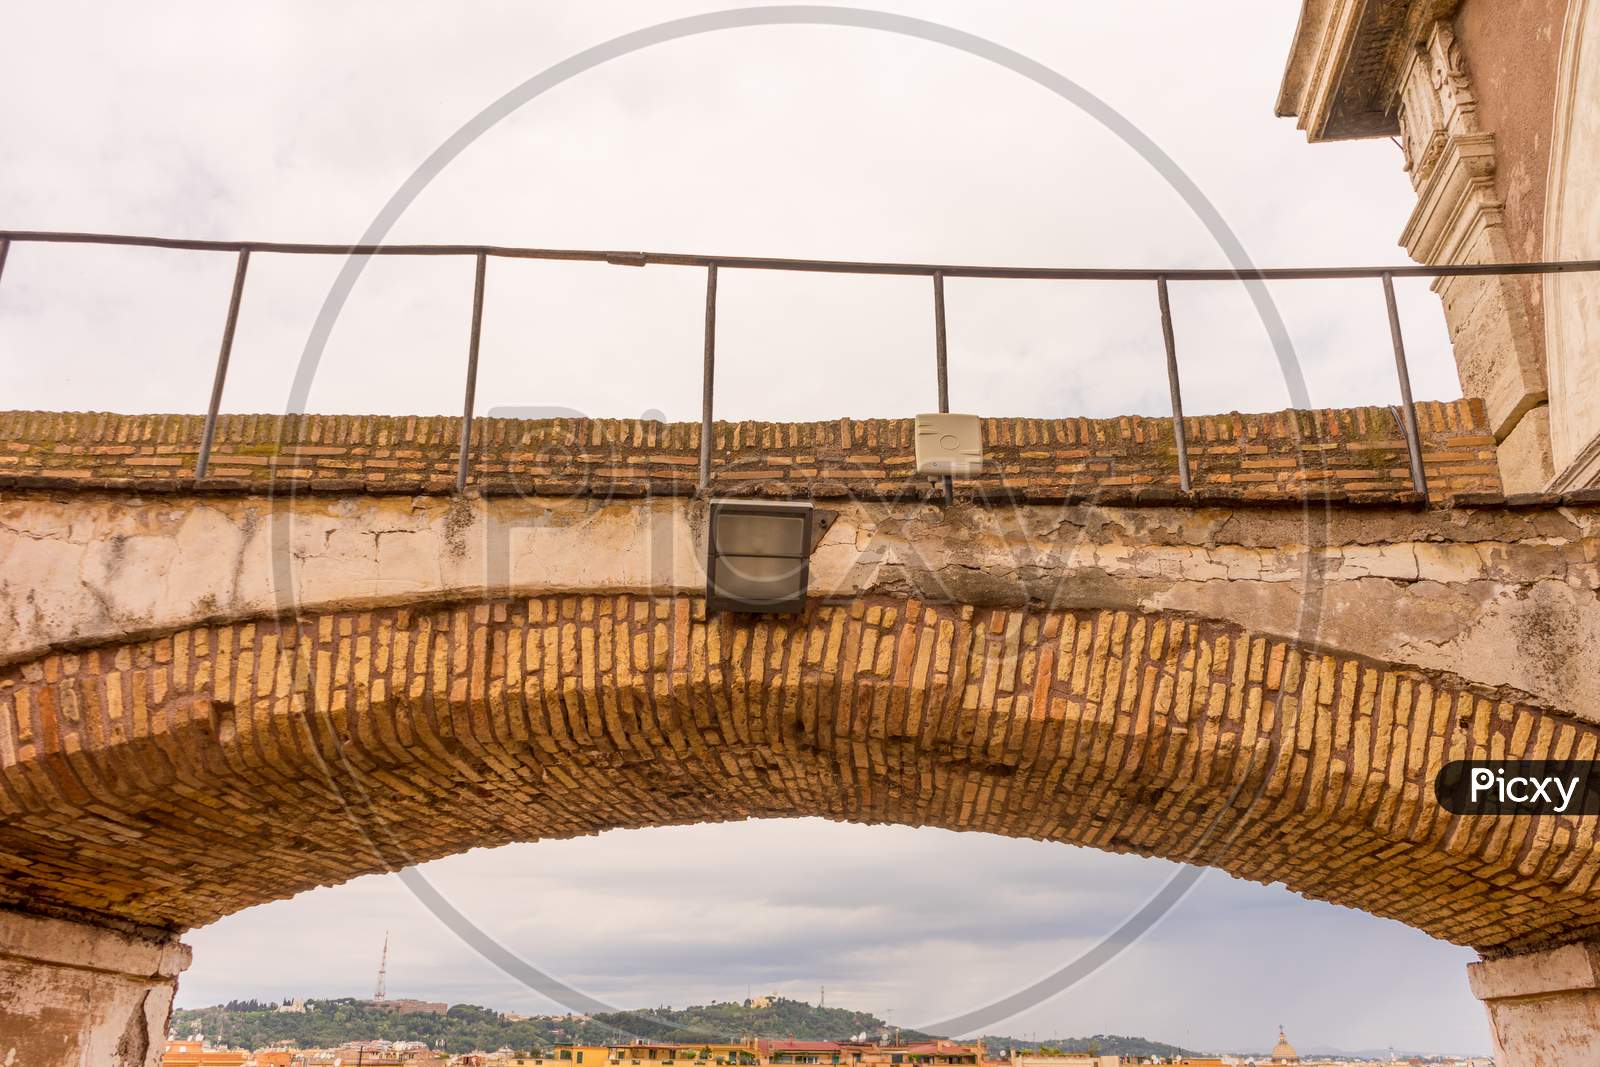 Italy, Rome, Castel Sant Angelo, Mausoleum Of Hadrian, A Long Bridge Over A Metal Fence